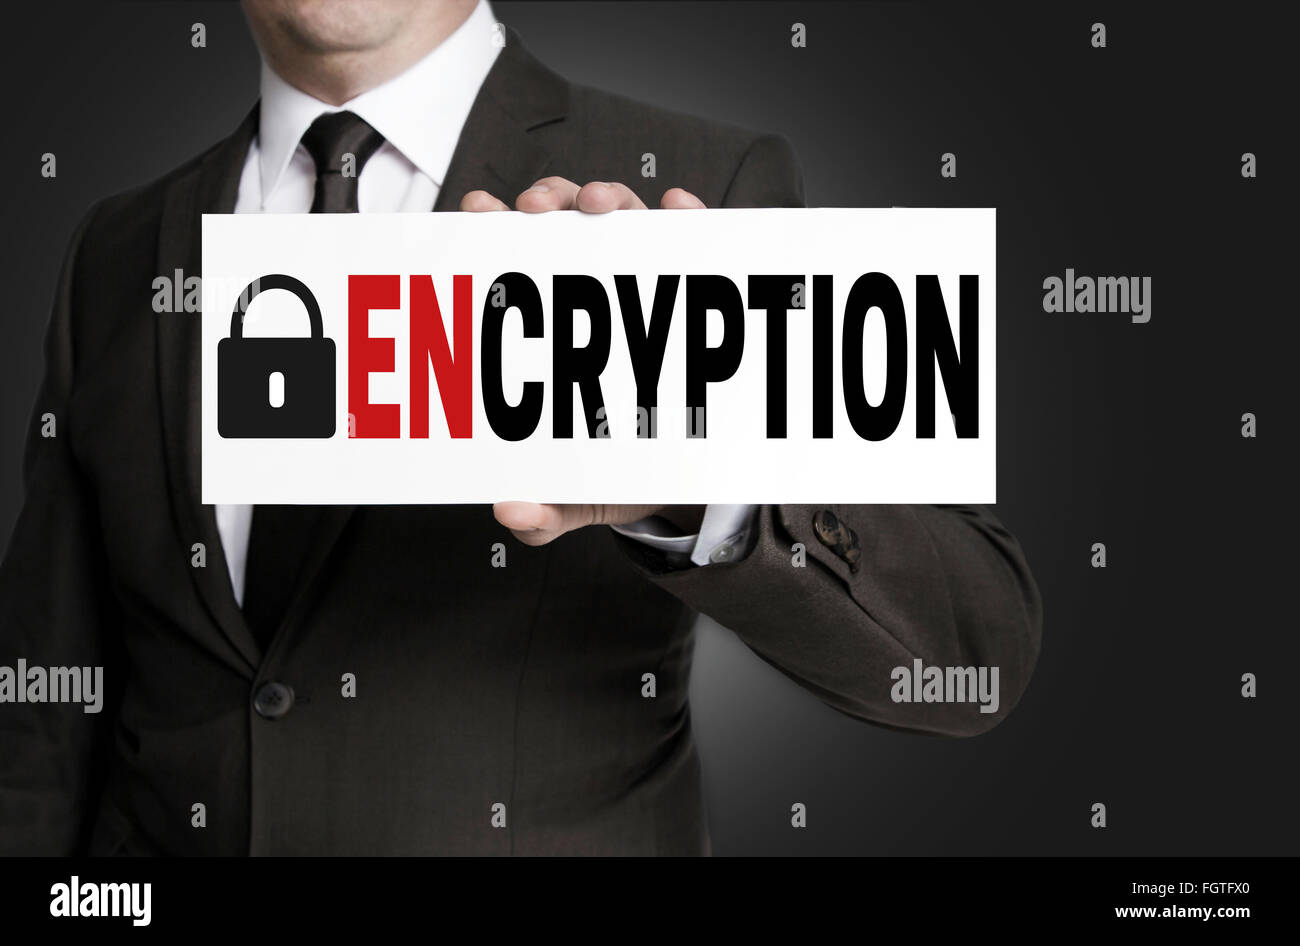 encryption sign is held by businessman. Stock Photo